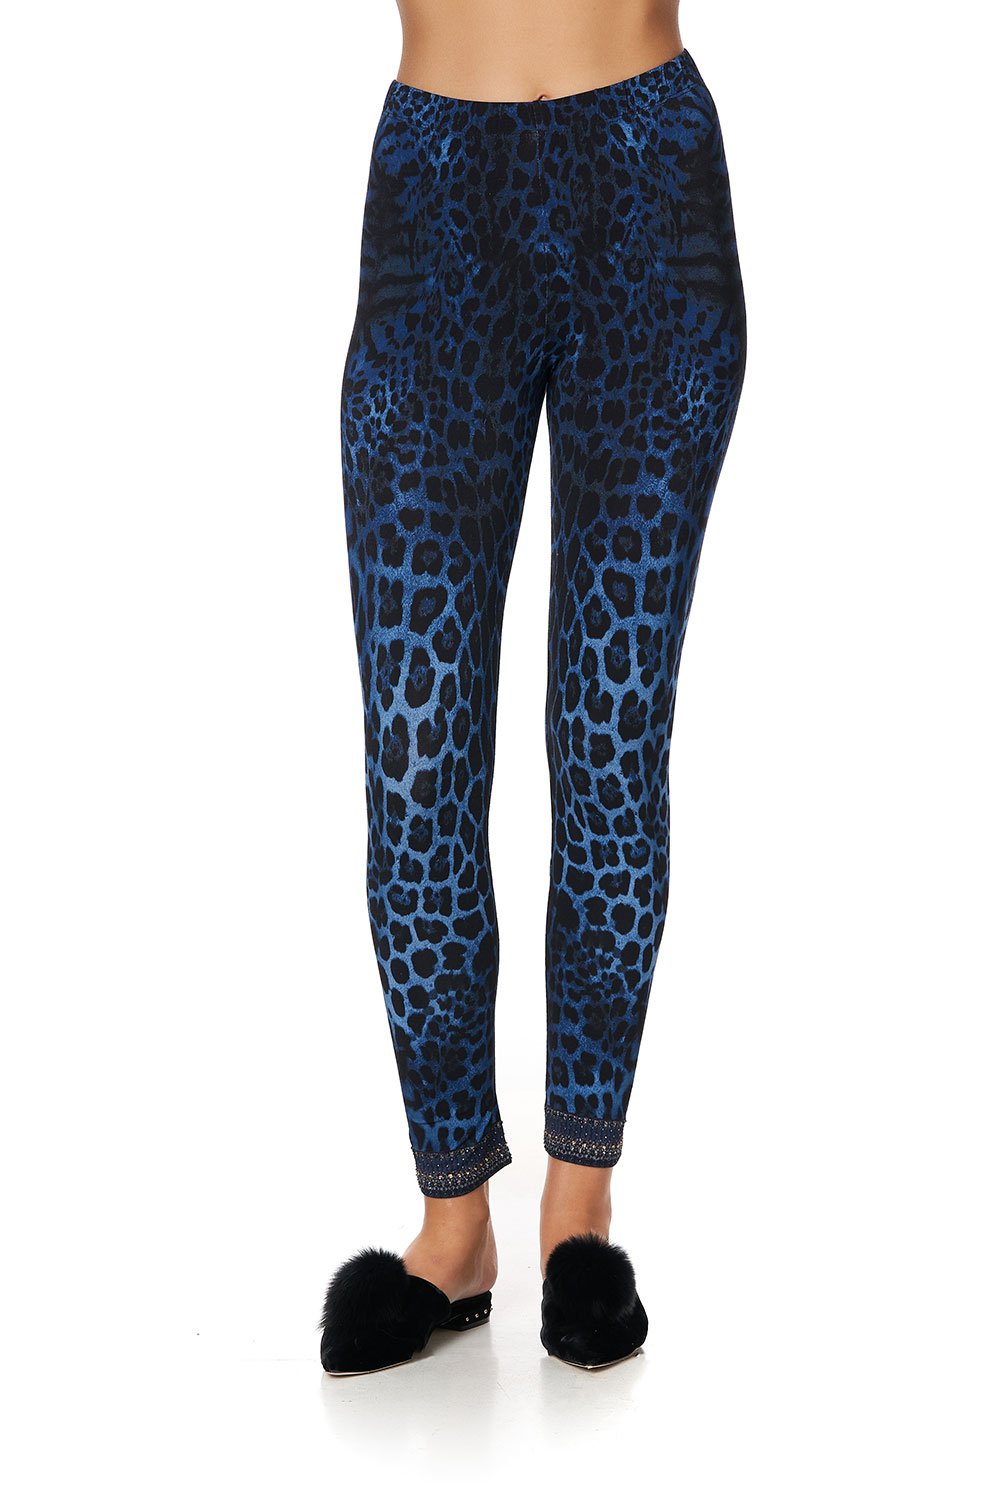 LEGGINGS THE CATS MEOW